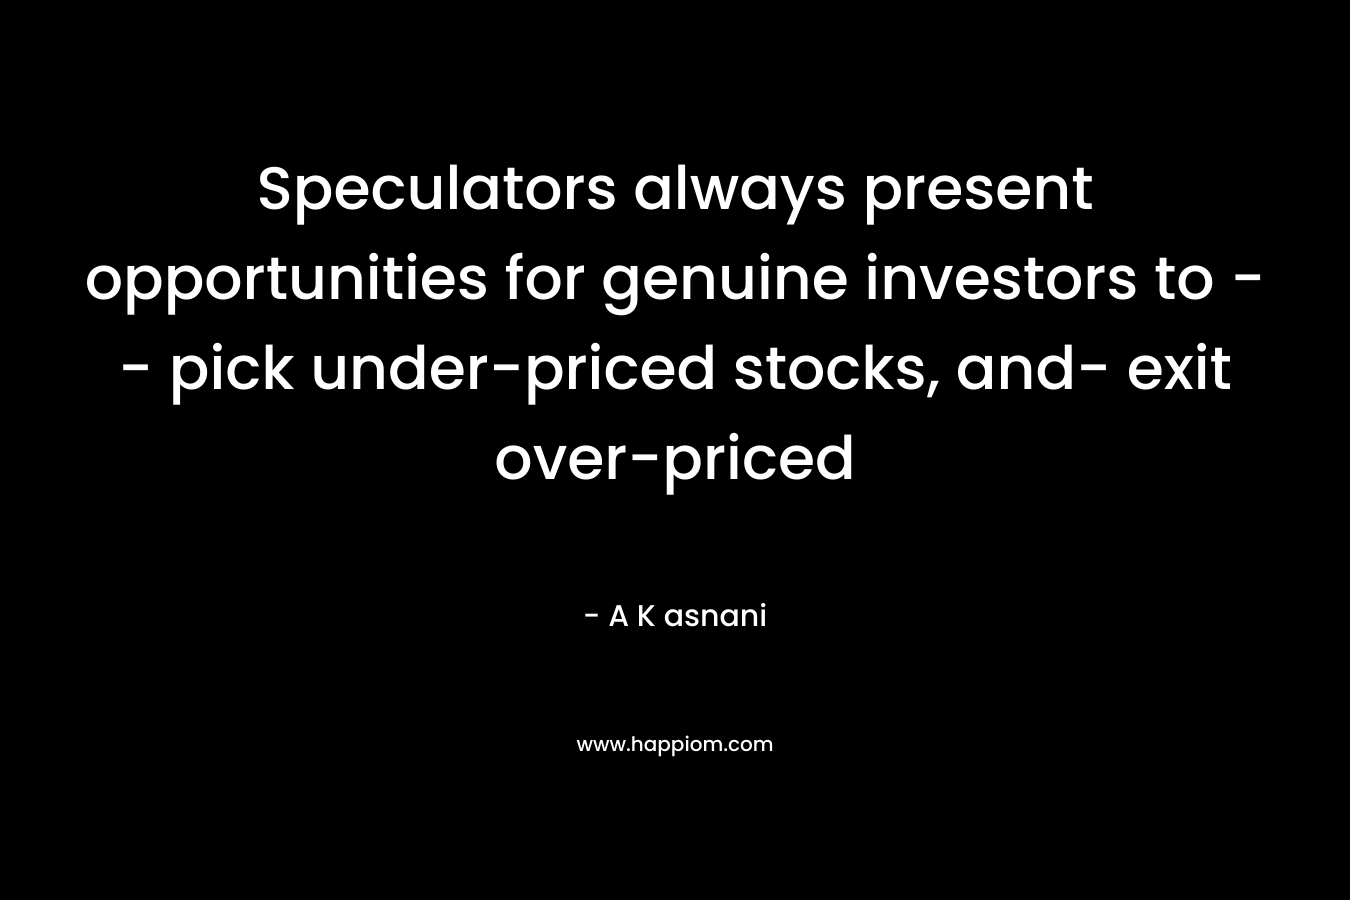 Speculators always present opportunities for genuine investors to — pick under-priced stocks, and- exit over-priced – A K asnani